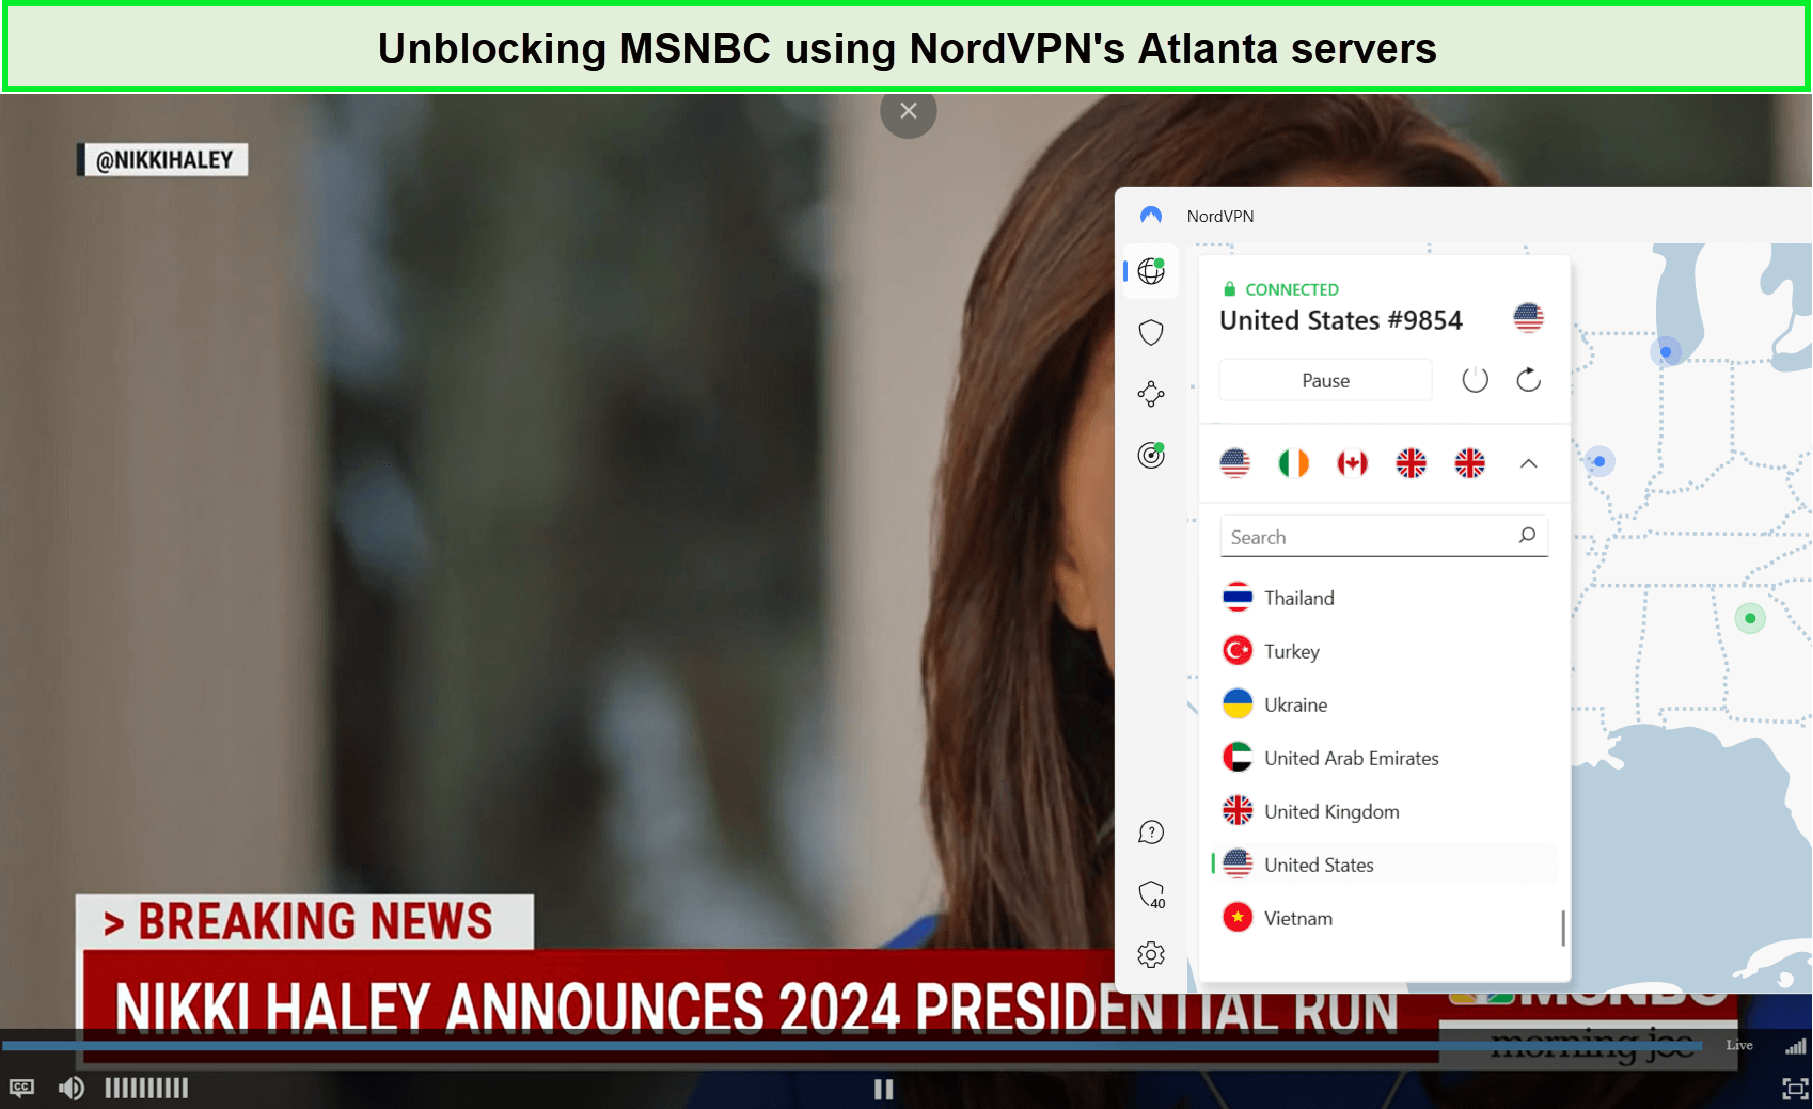 unblocking-msnbs-using-nordvpn-in-Germany